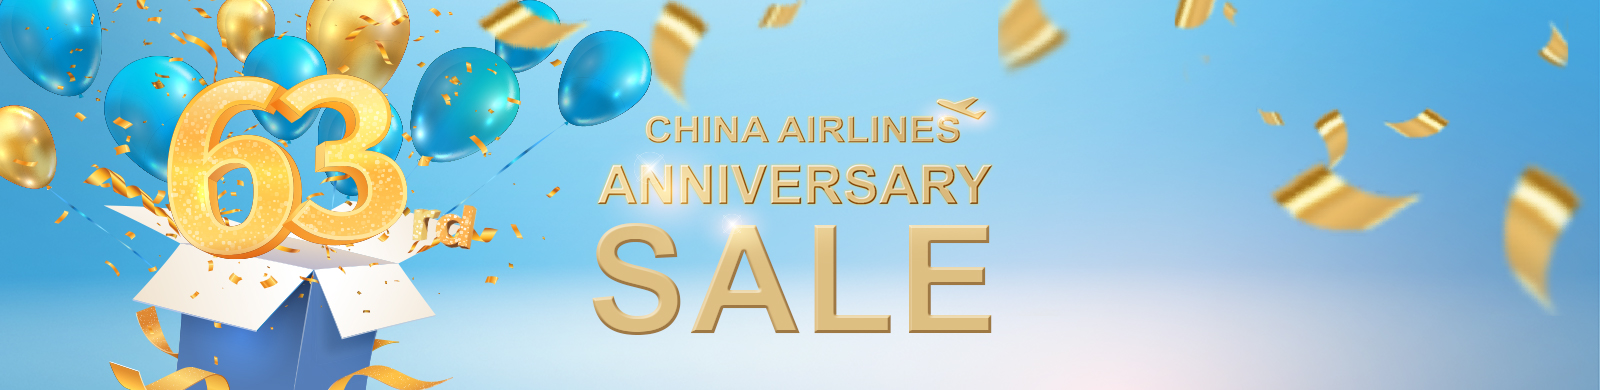 China Airlines: 63rd Anniversary Sale ci 63rd anniversary sale